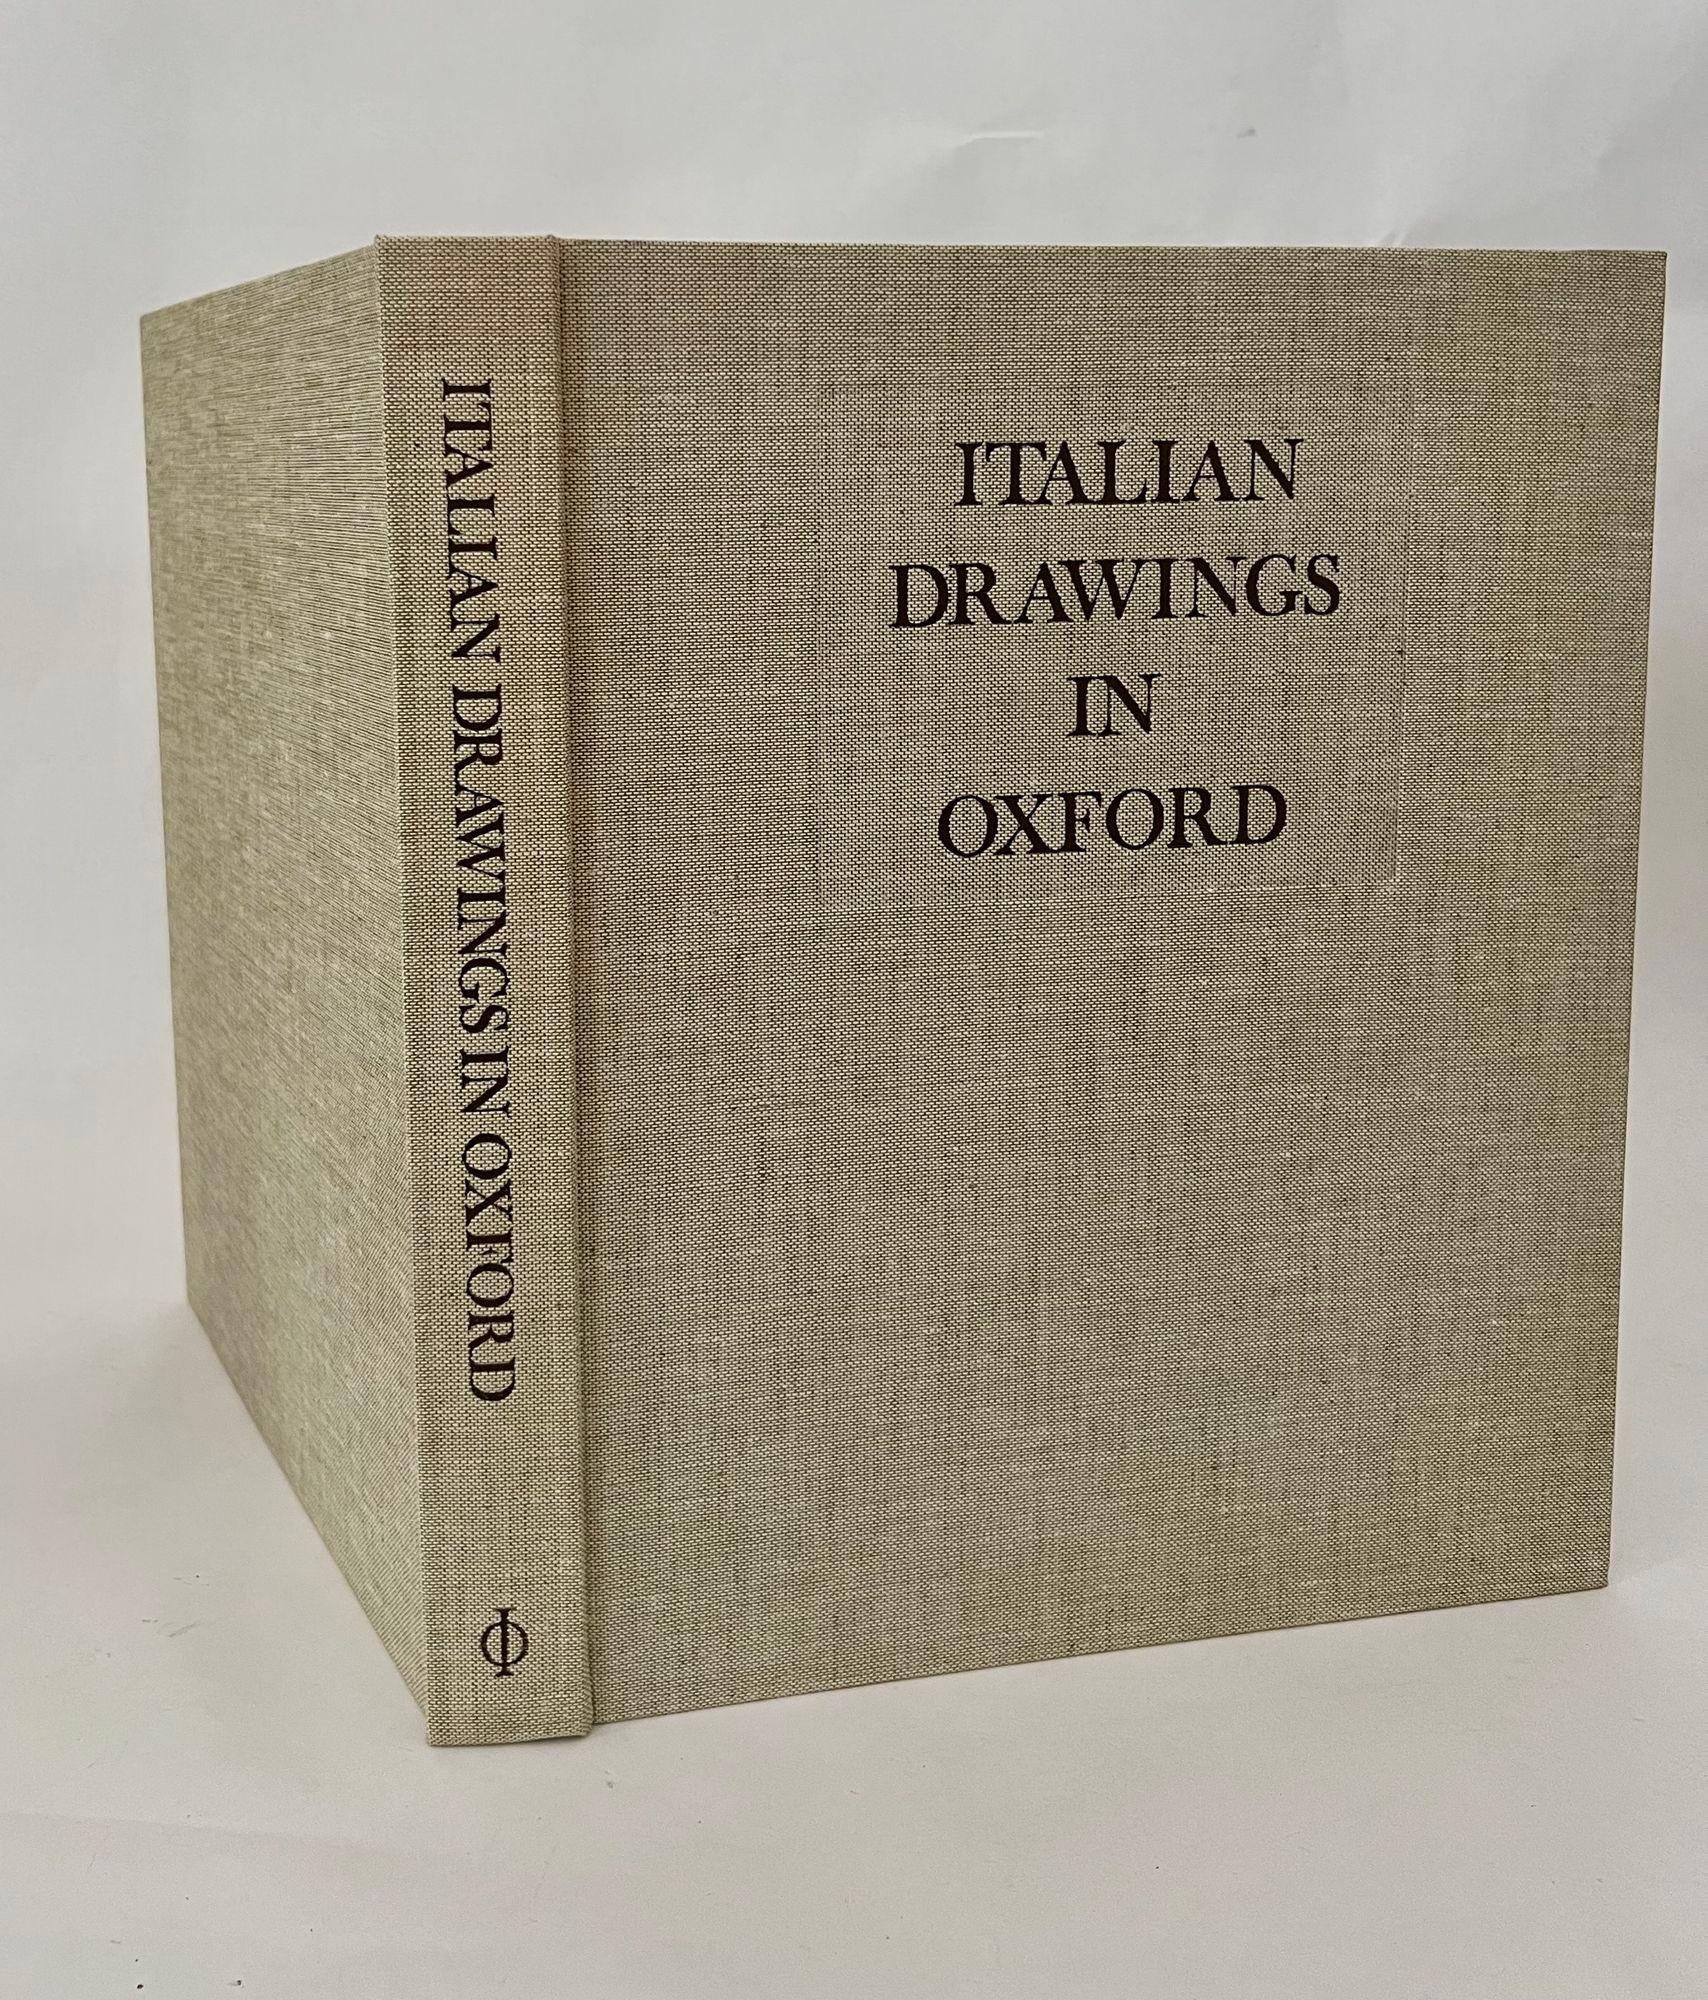 Italian Drawings In Oxford by Terisio Pignatti, First English Publication, 1977 For Sale 5